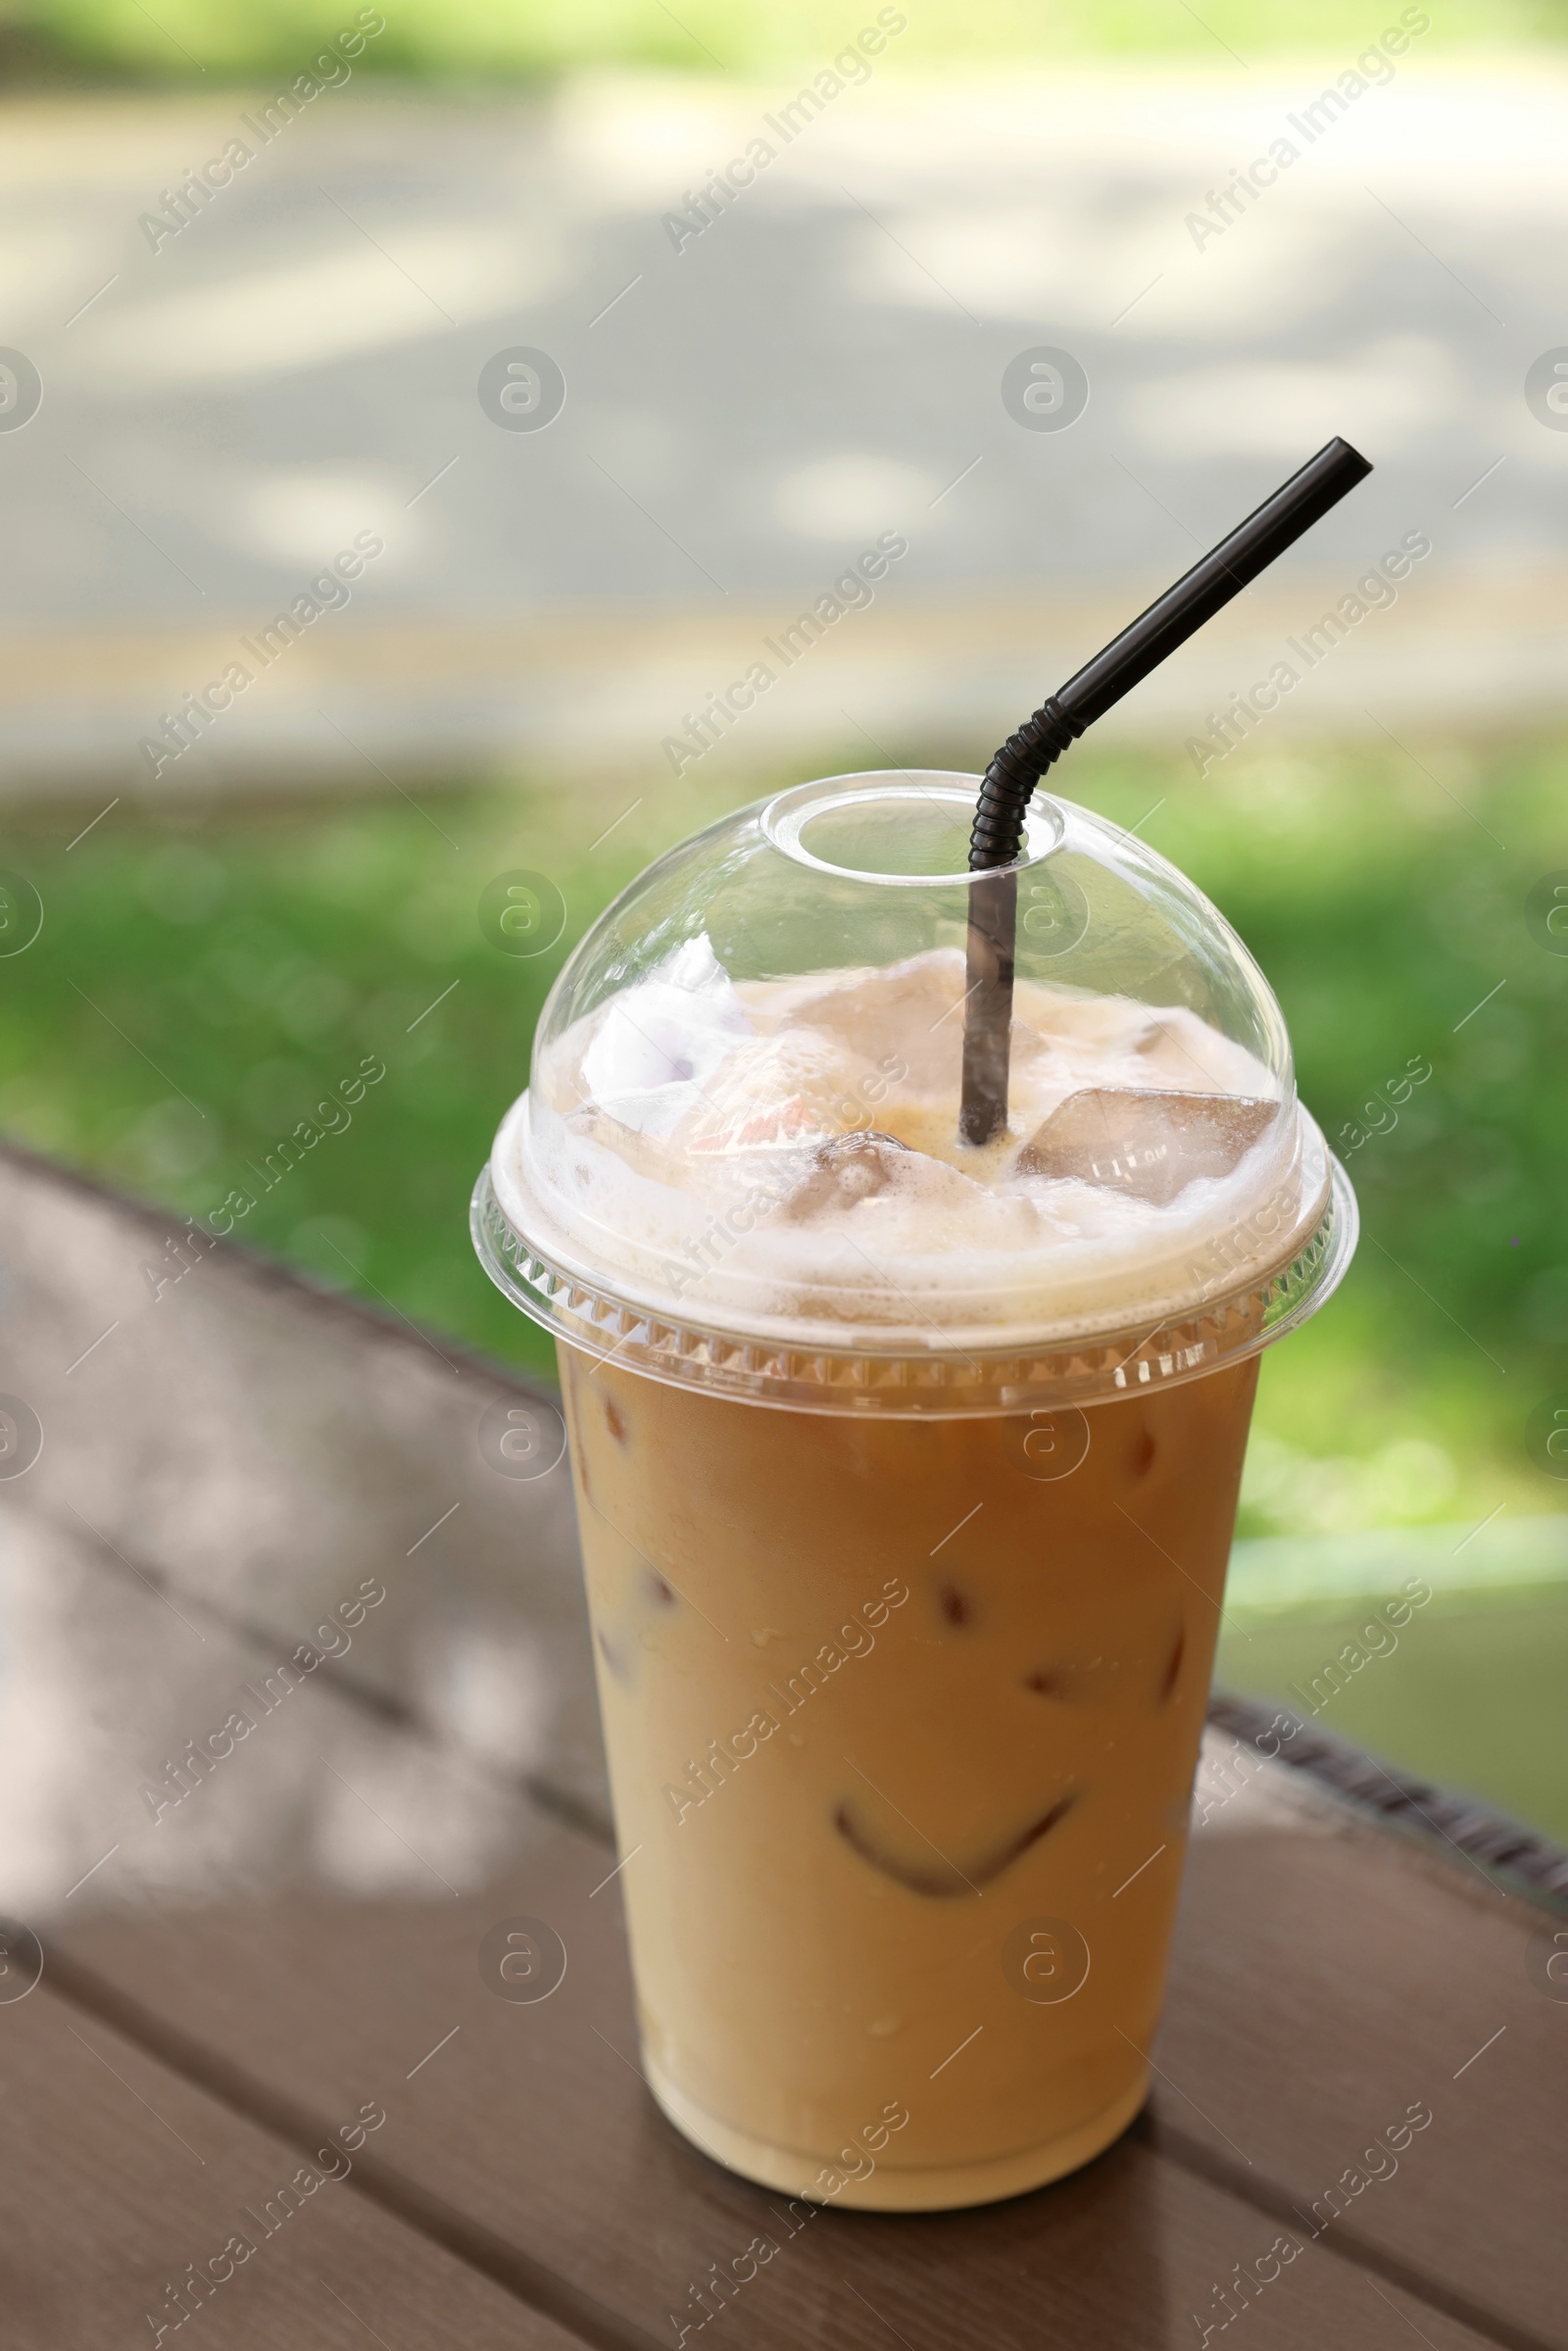 Photo of Plastic takeaway cup of delicious iced coffee at table in outdoor cafe